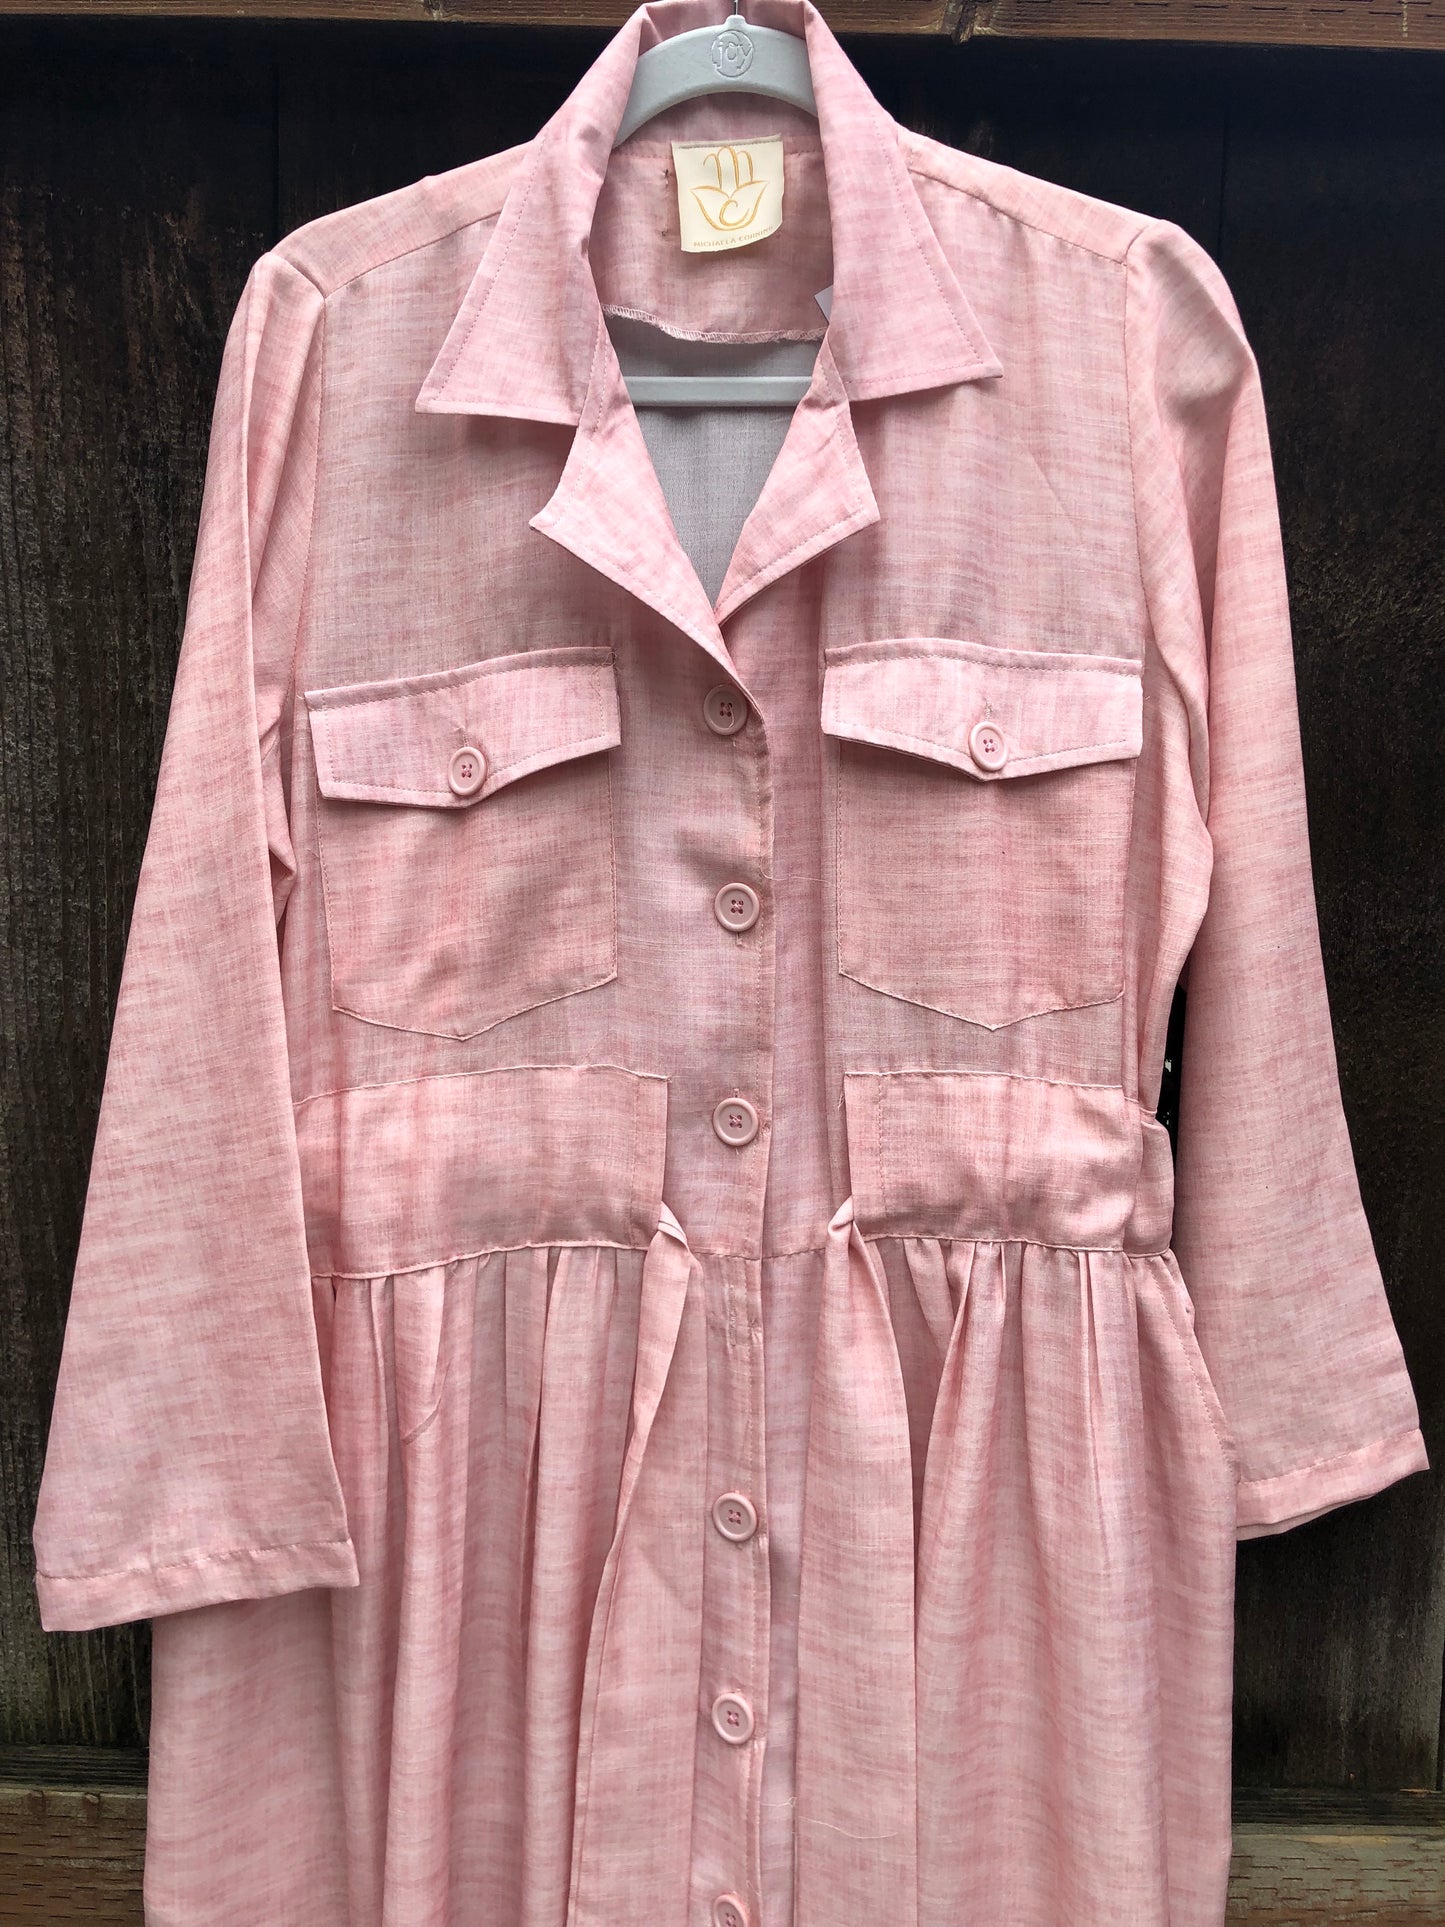 Spring Trench Dress - Pink